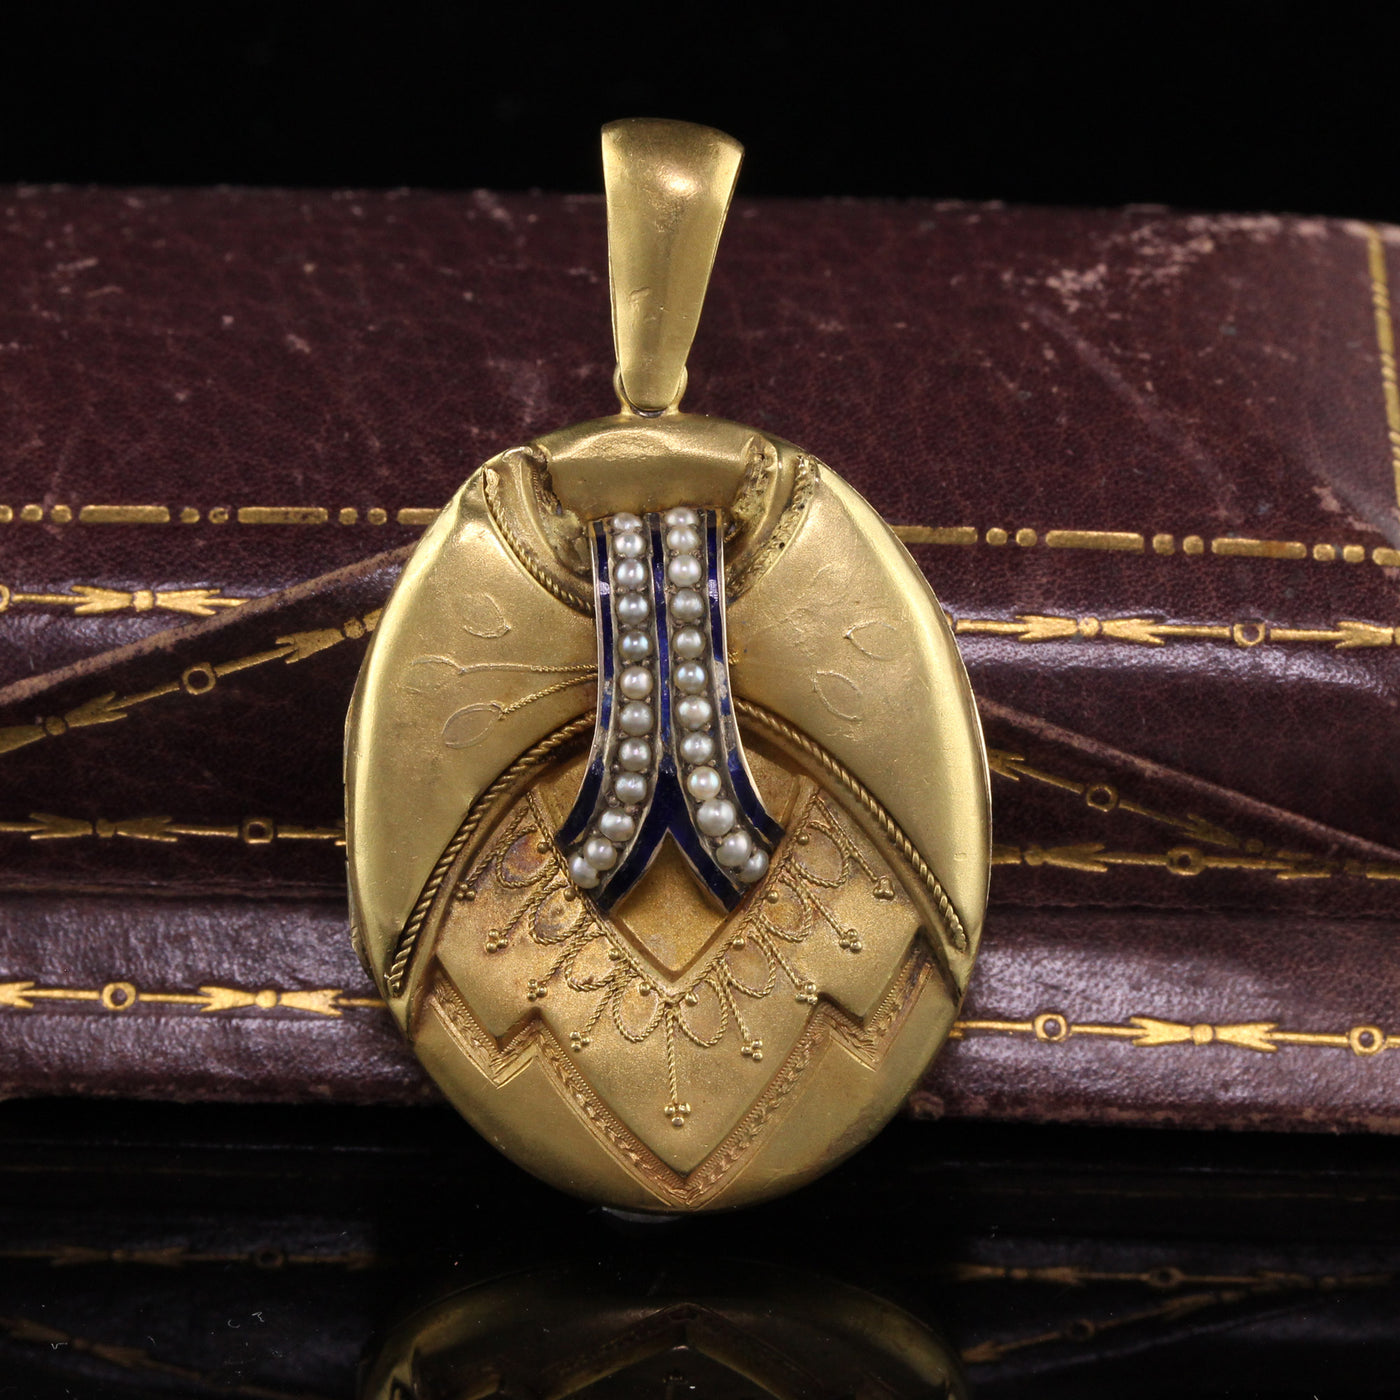 Antique Victorian 18K Yellow Gold Seed Pearl and Enamel Locket